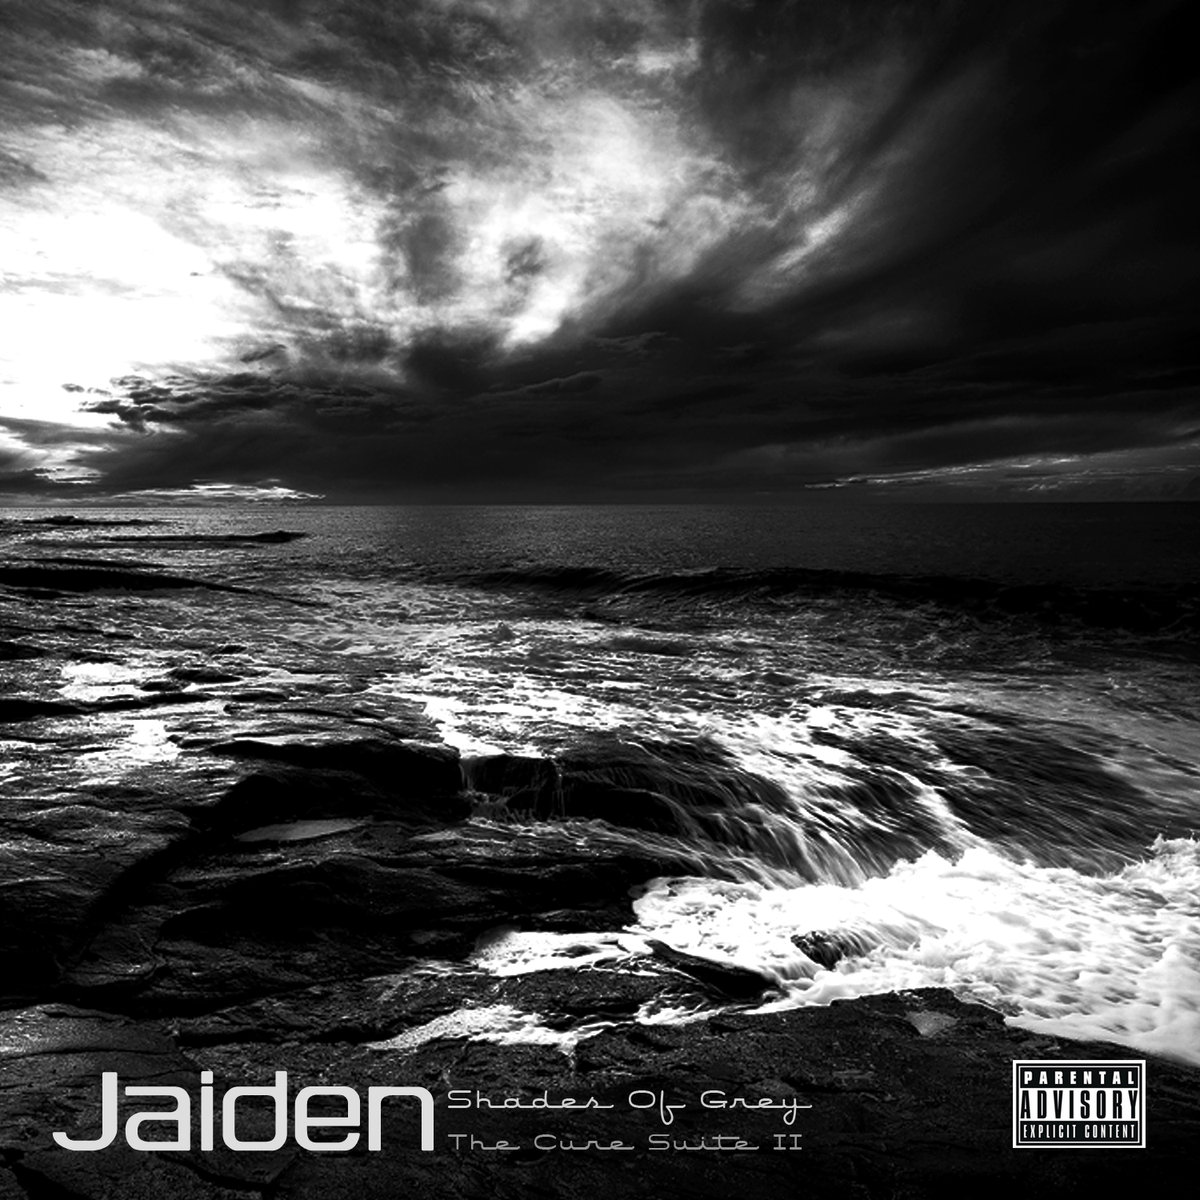 Jaiden "The Cure" Releases "Shades Of Grey: The Cure Suite II" Mixtape